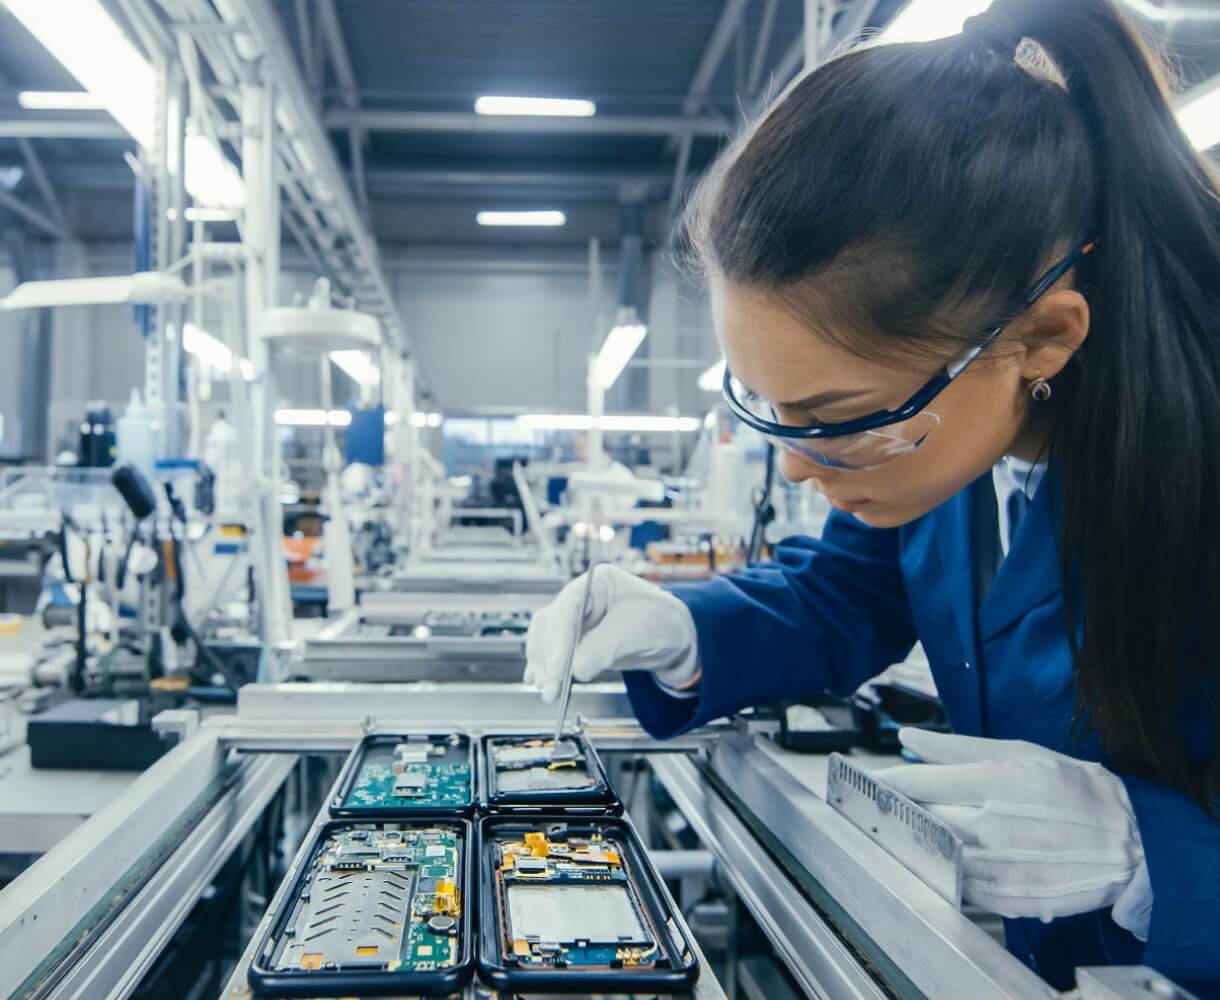 A female technician in a blue uniform meticulously assembles components in an industrial manufacturing setting.